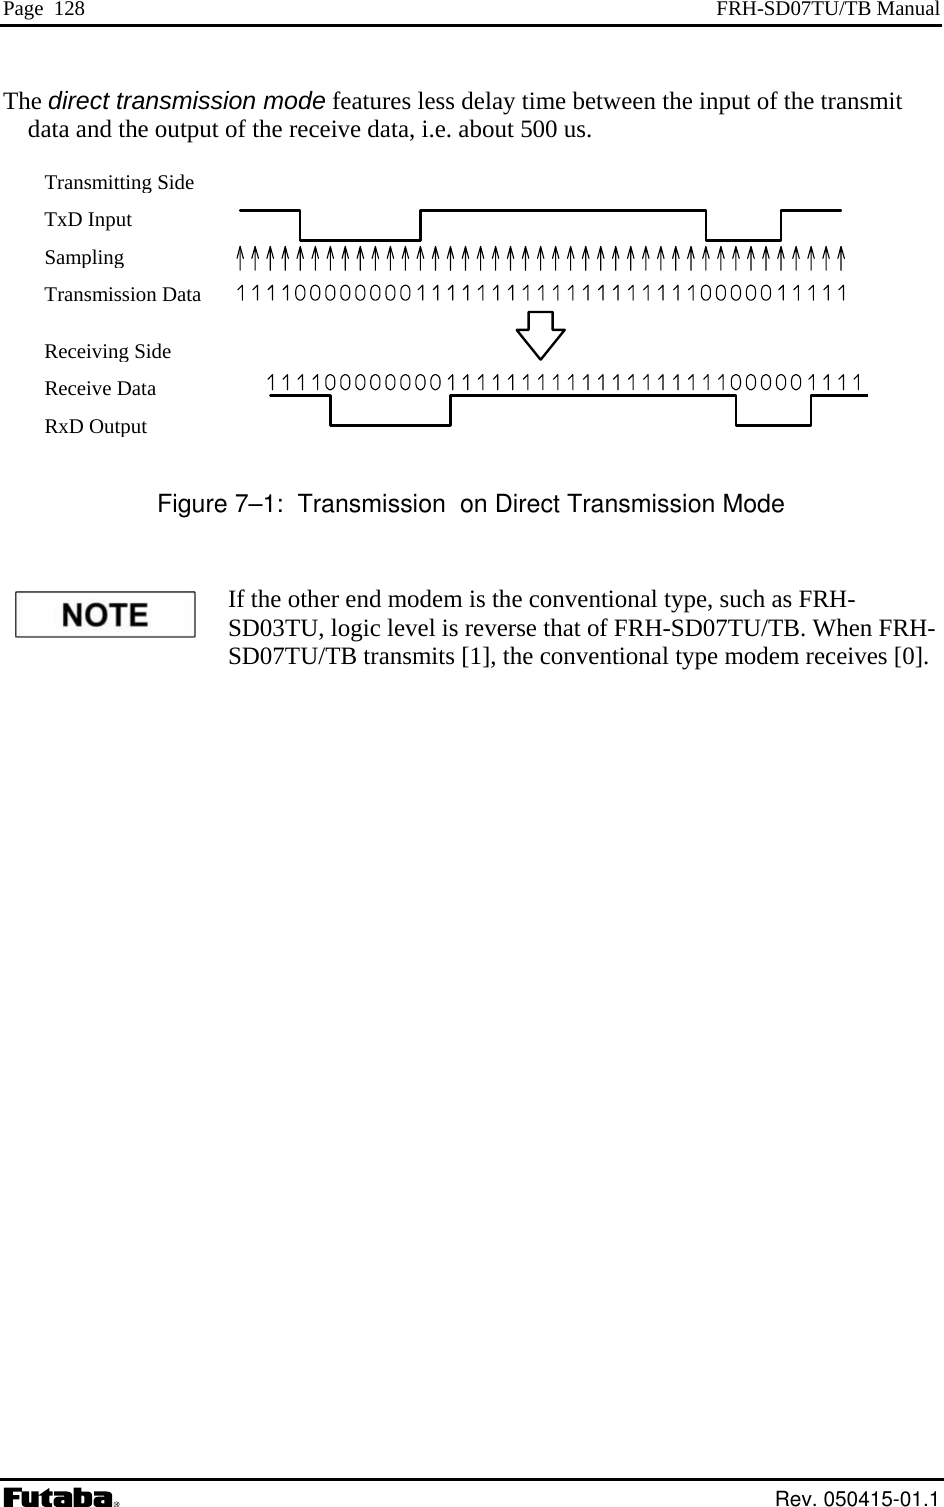 Page  128  FRH-SD07TU/TB Manual The direct transmission mode f nput of the transmit eatures less delay time between the idata and the output of the receive data, i.e. about 500 us.  Transmitting Side                  SD03TU, logic level is reverse that of FRH-SD07TU/TB. When FRH-SD07TU/TB transmits [1], the conventional type modem receives [0].     TxD Input Sampling Transmission Data Receiving SideReceive Data R xD Output Figure 7–1:  Transmission  on Direct Transmission Mode If the other end modem is the conventional type, such as FRH- Rev. 050415-01.1 